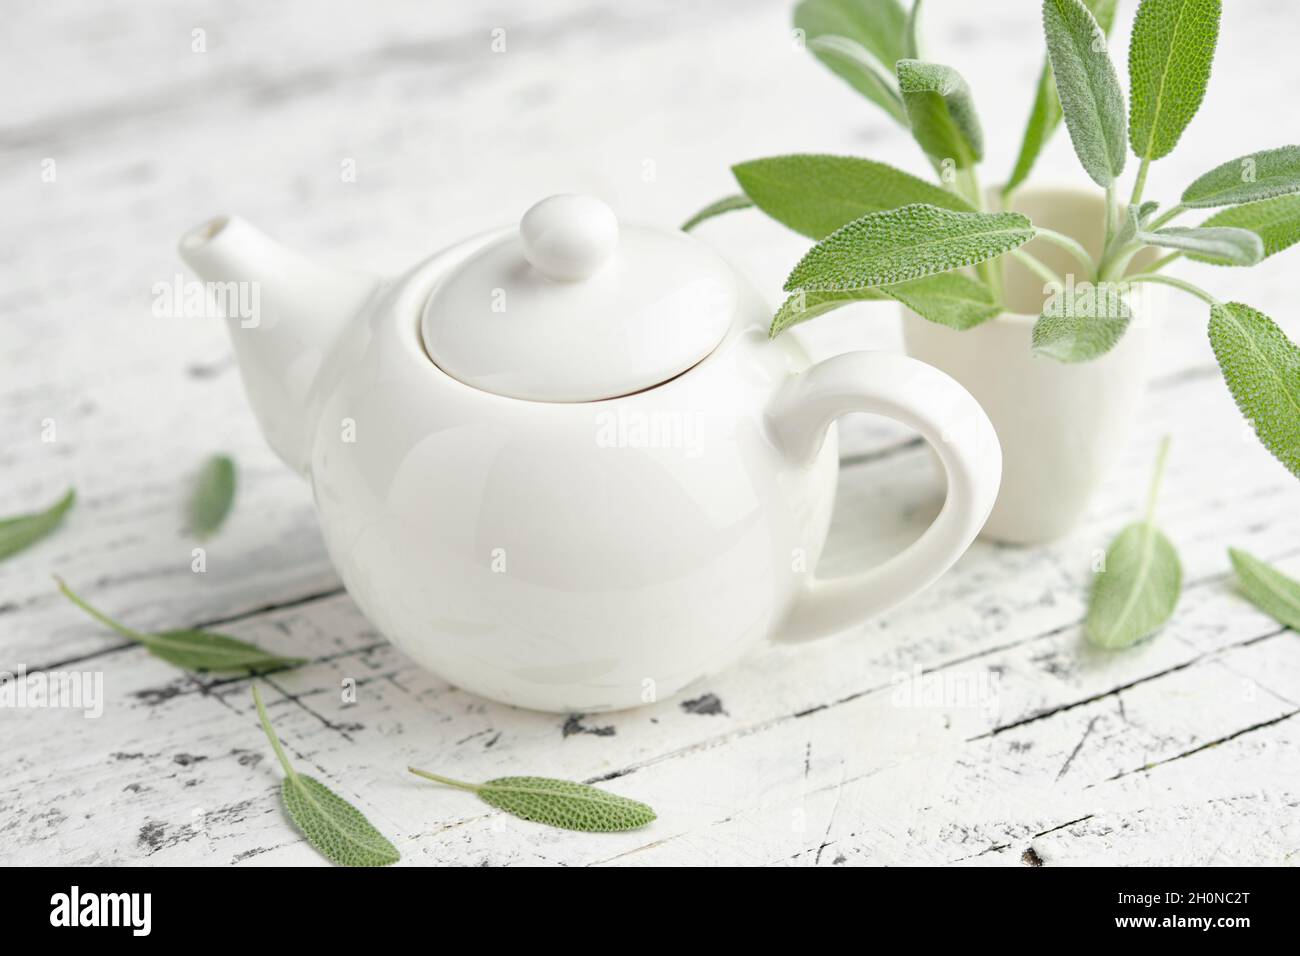 Tea kettle of healthy sage herbal tea, fresh green leaves of salvia officinalis medicinal herb on white wooden table. Stock Photo